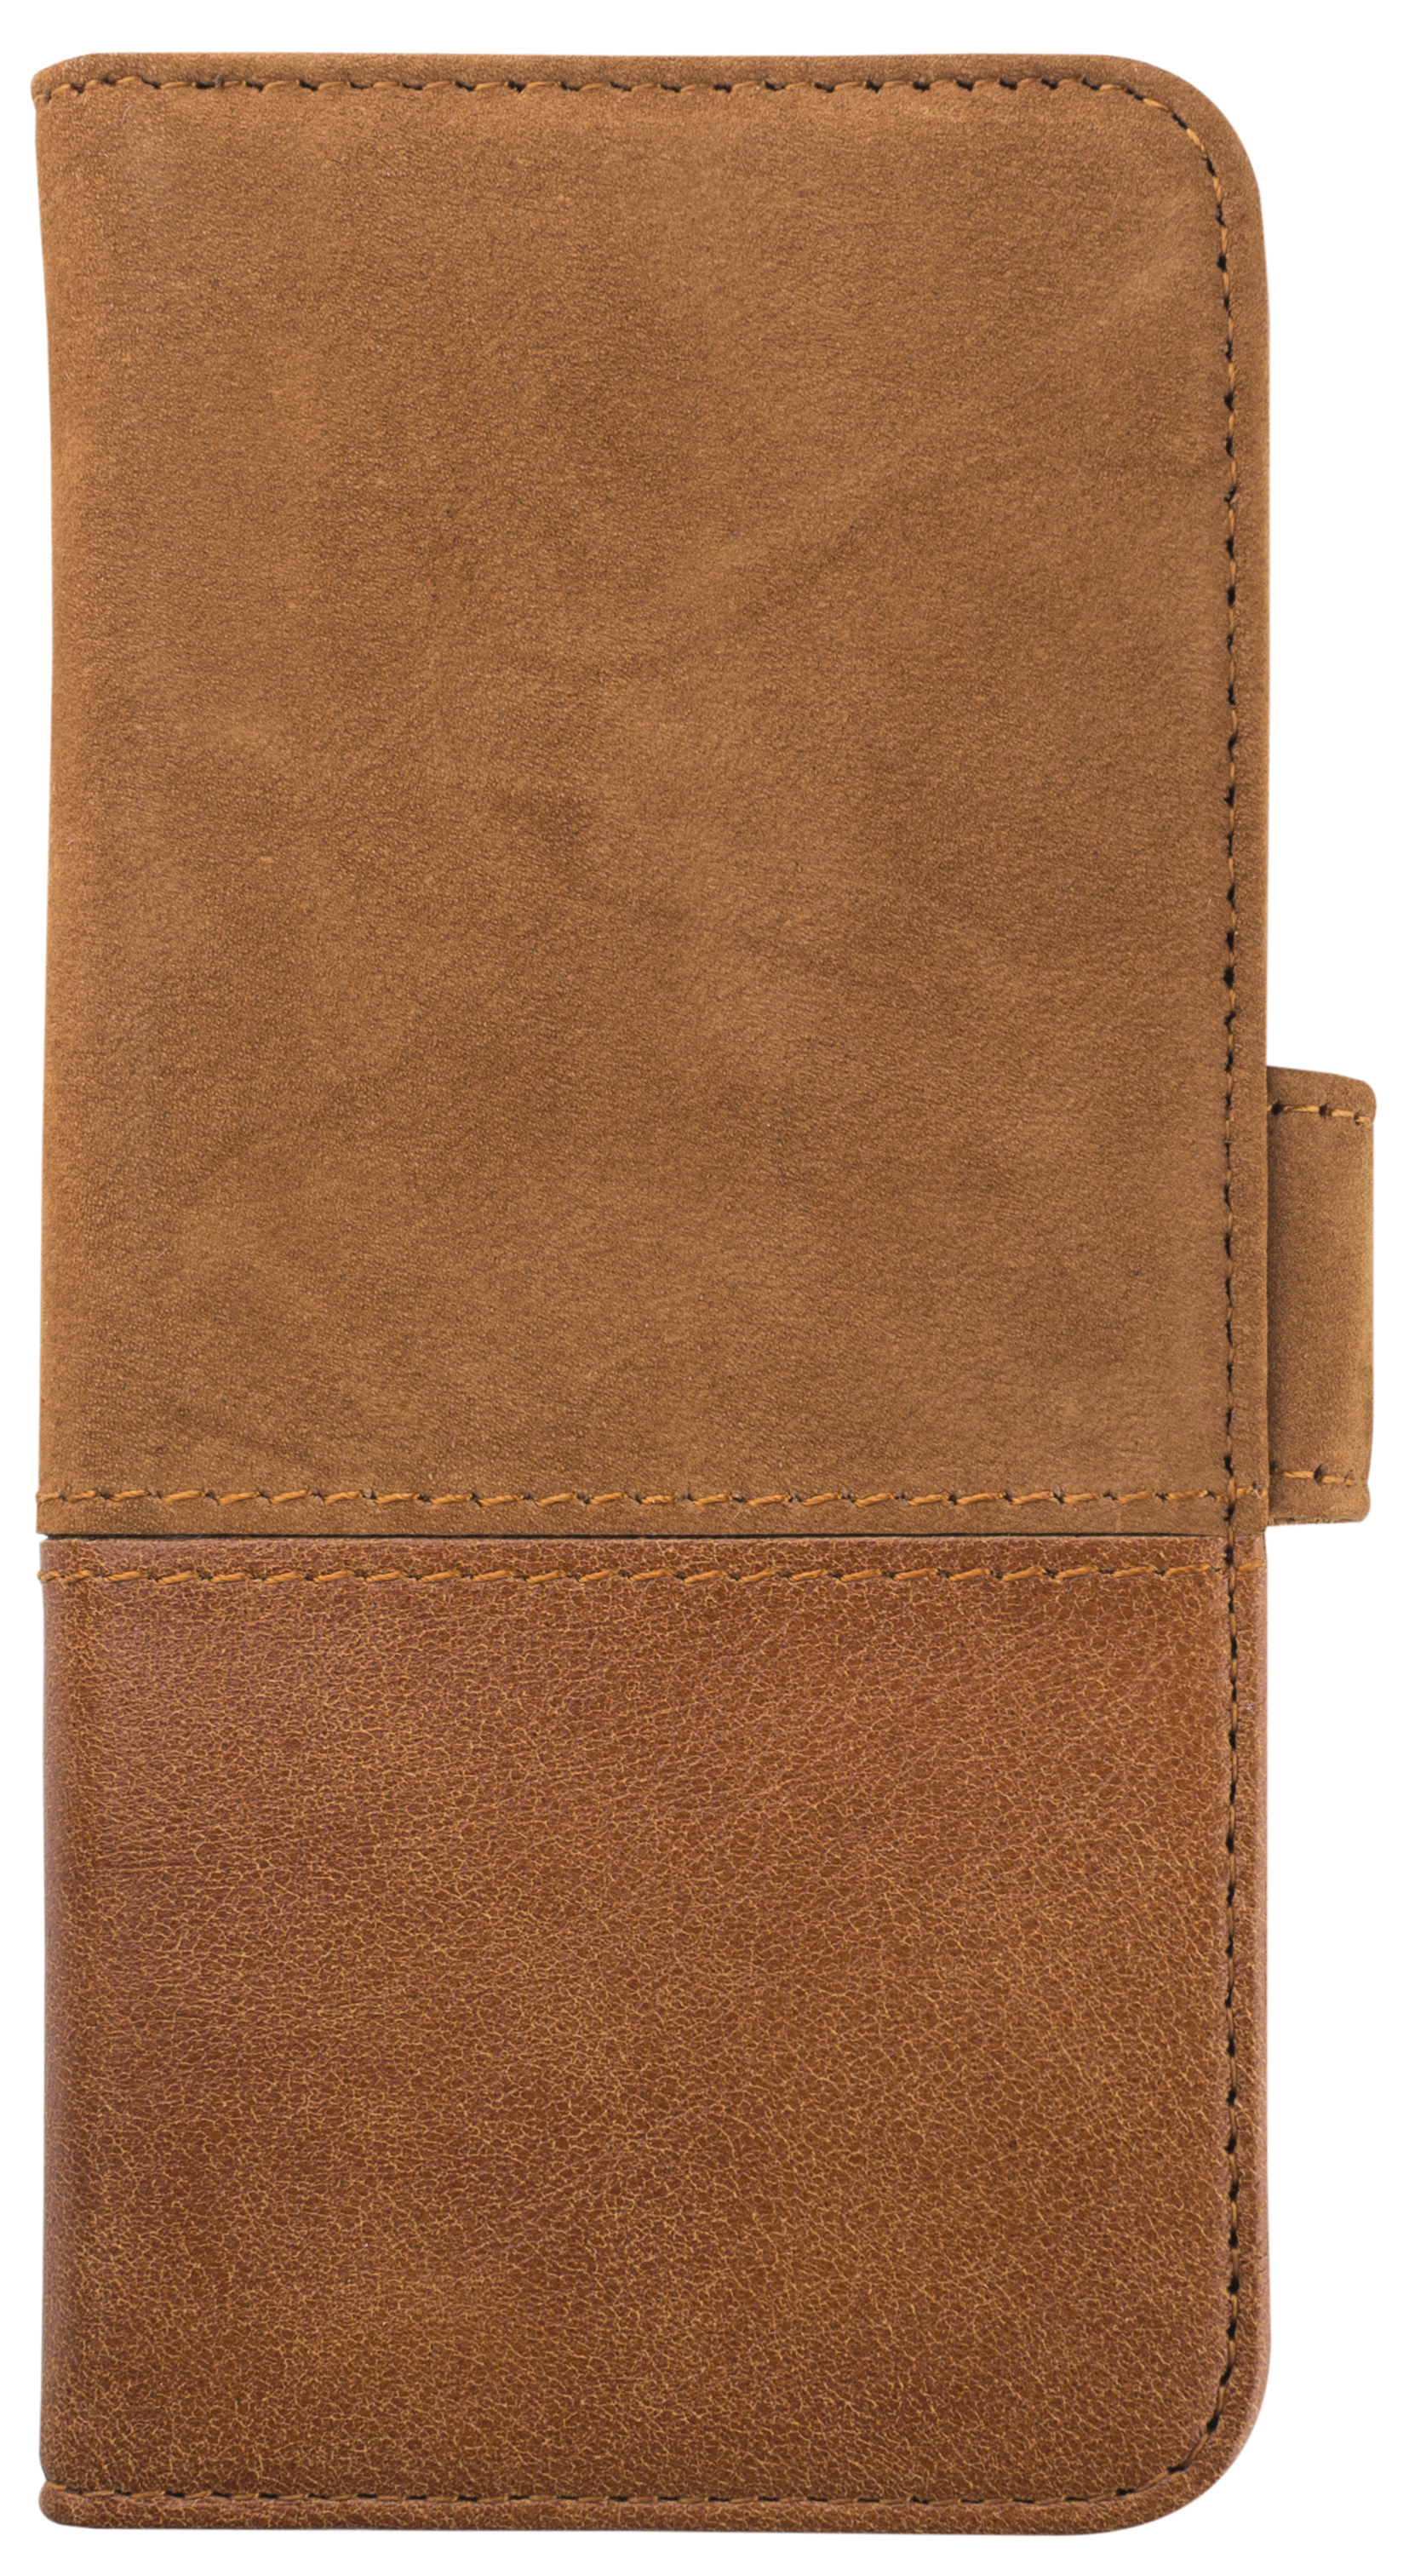 HOLDIT Wallet magnet pouzdro flip Samsung Galaxy S8+ brown leather/suede